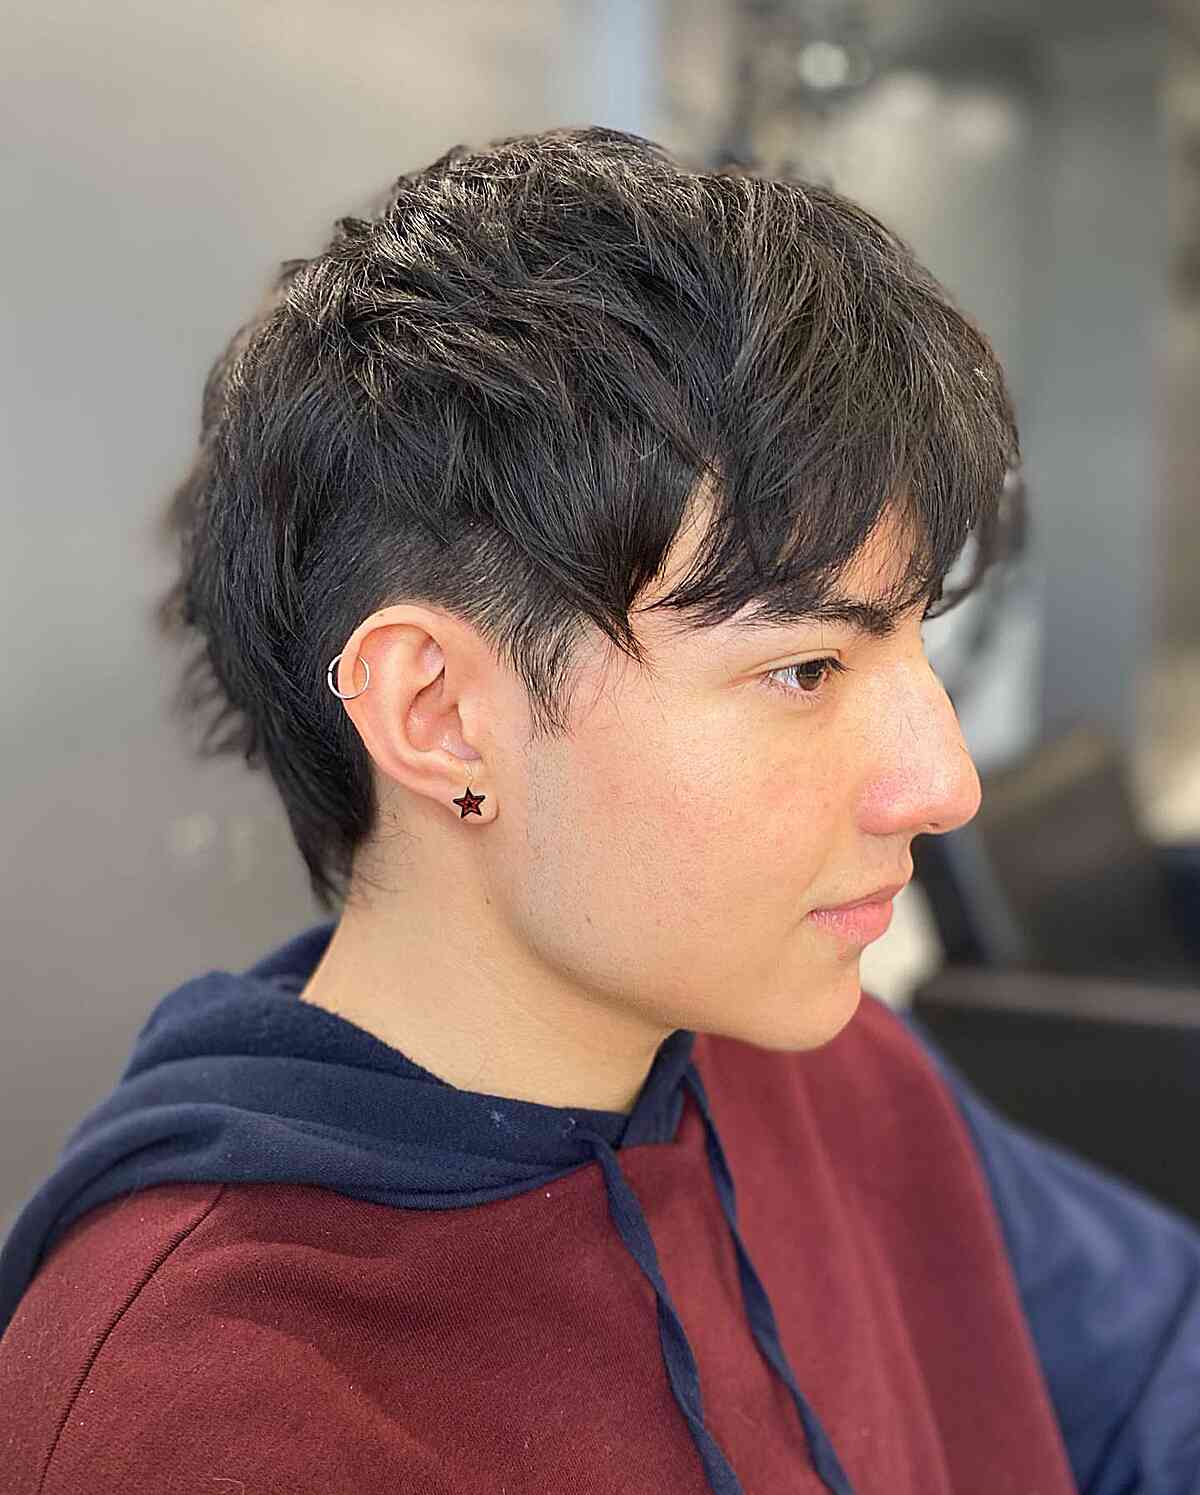 Kpop-Inspired Textured Fohawk Fade on Young Guys